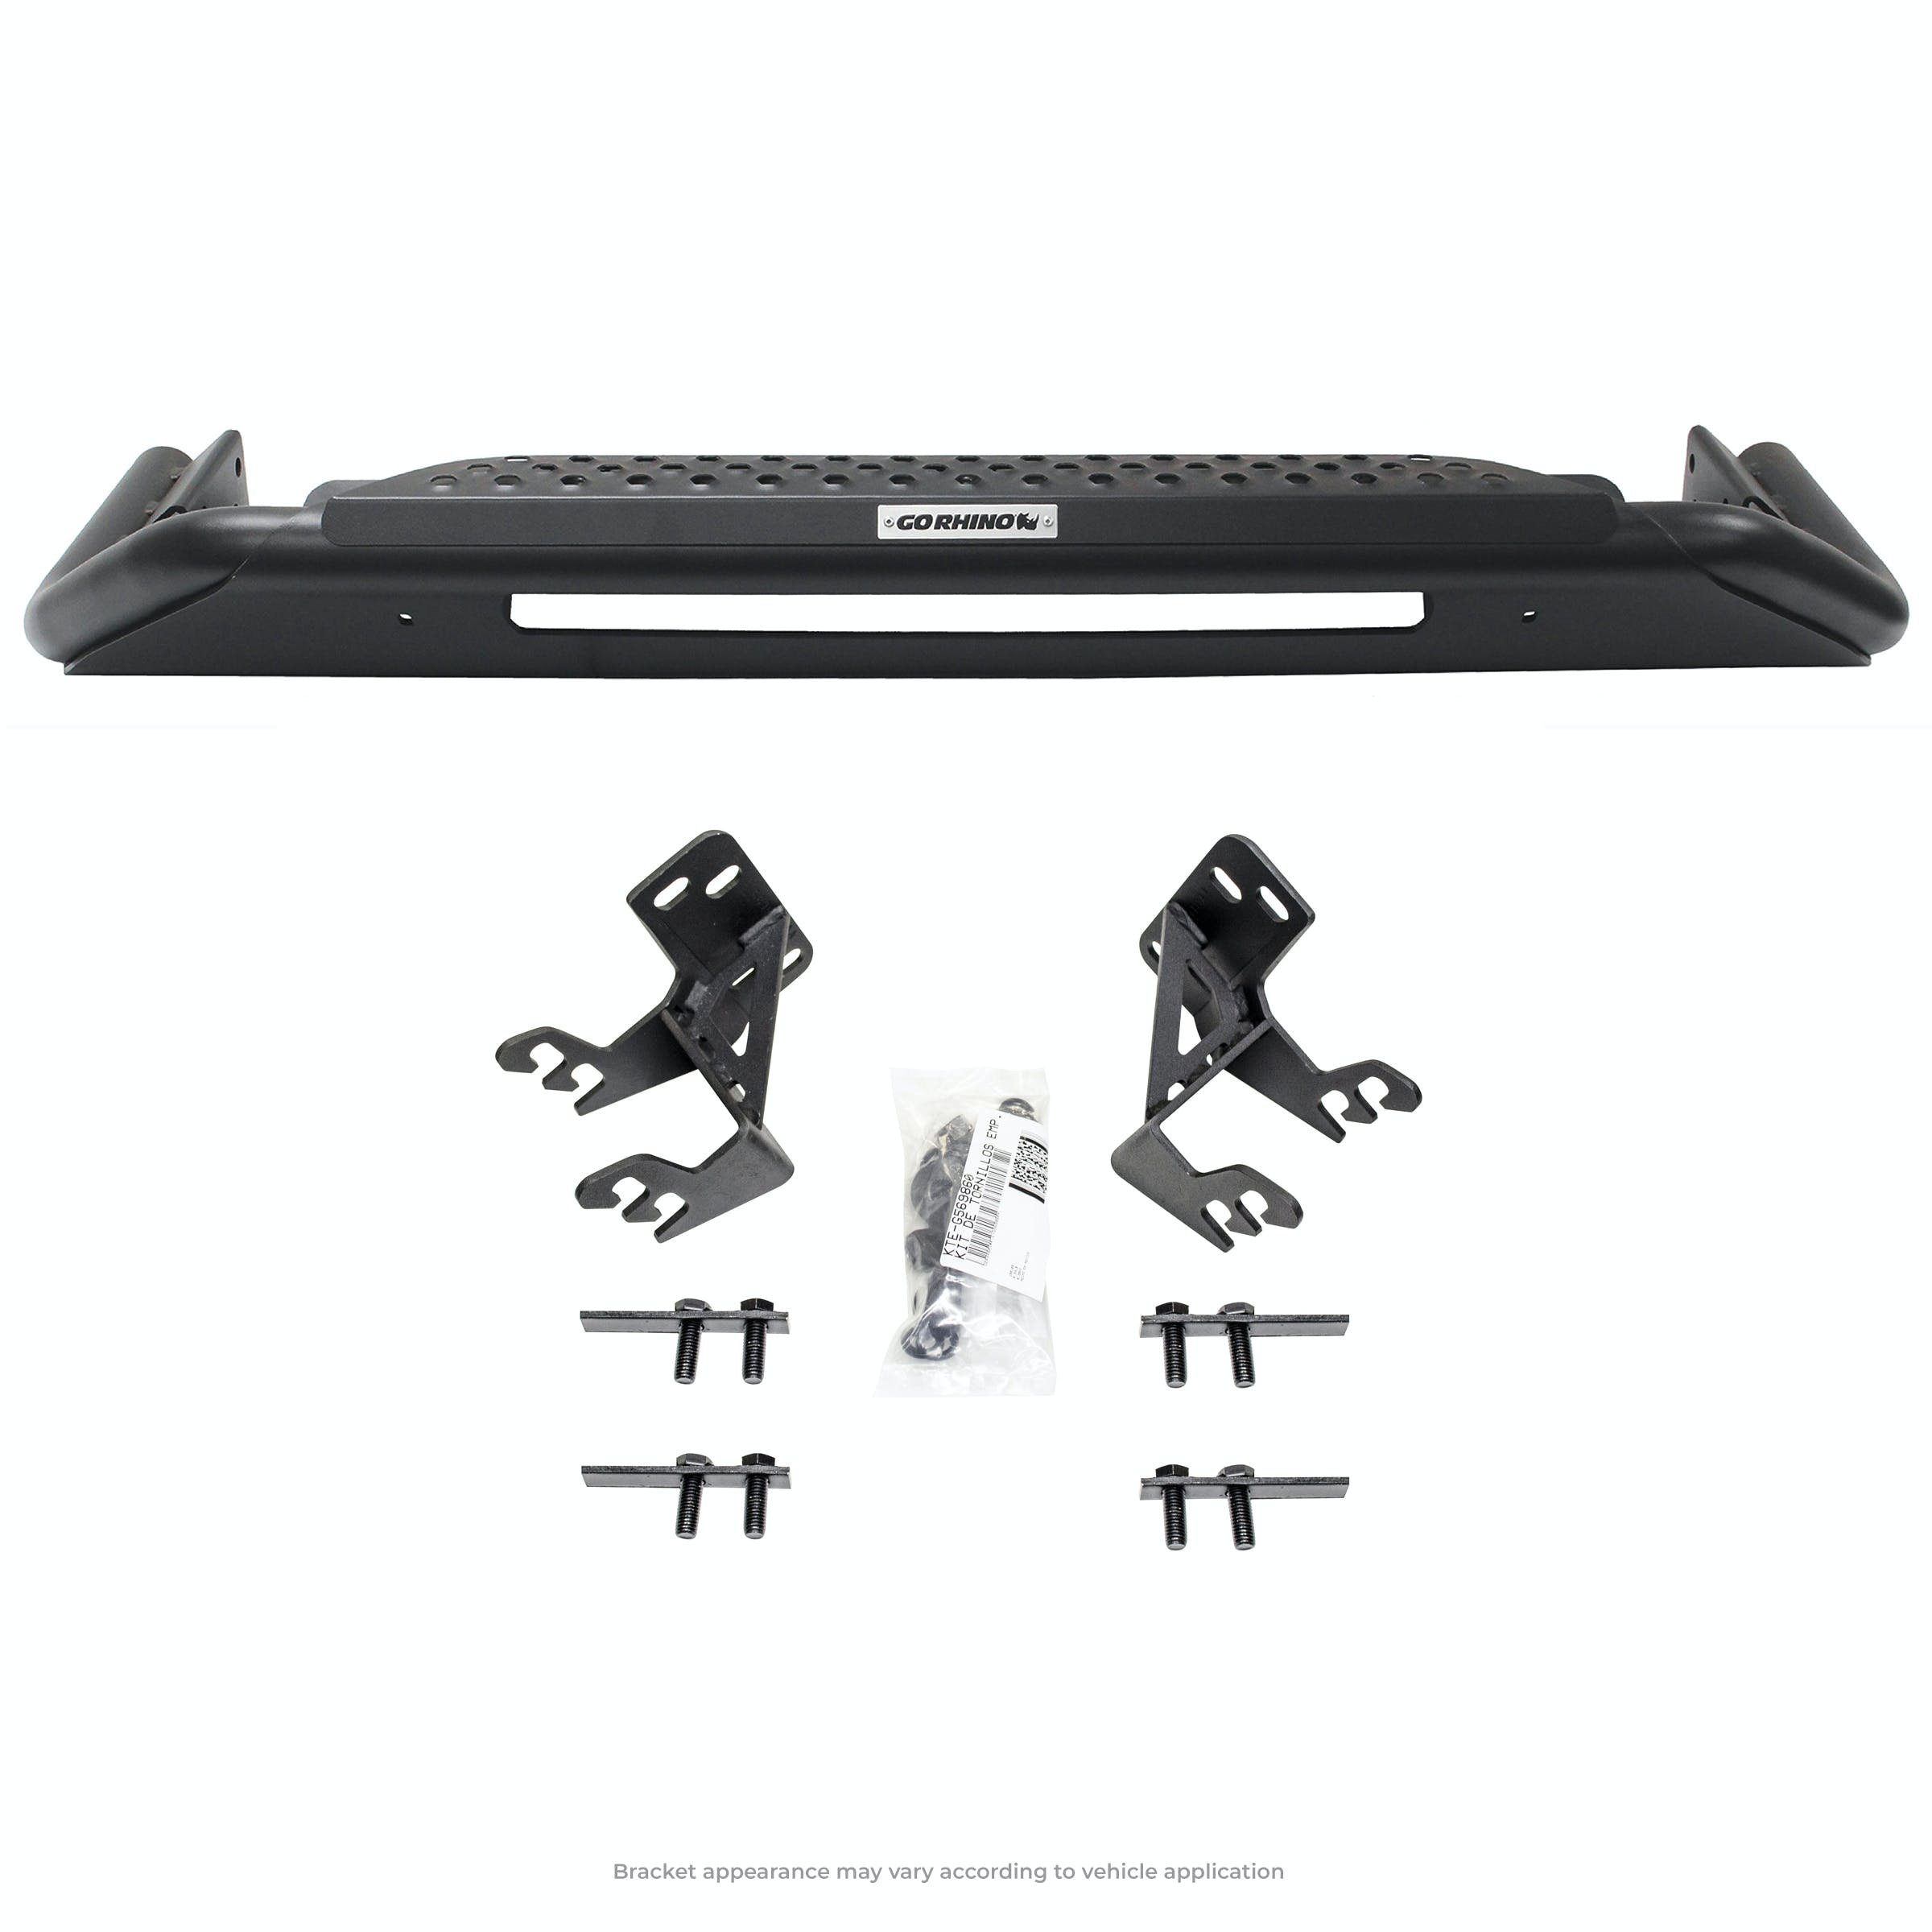 Go Rhino 561760T RC3 LR - Complete kit: Front guard + Brackets